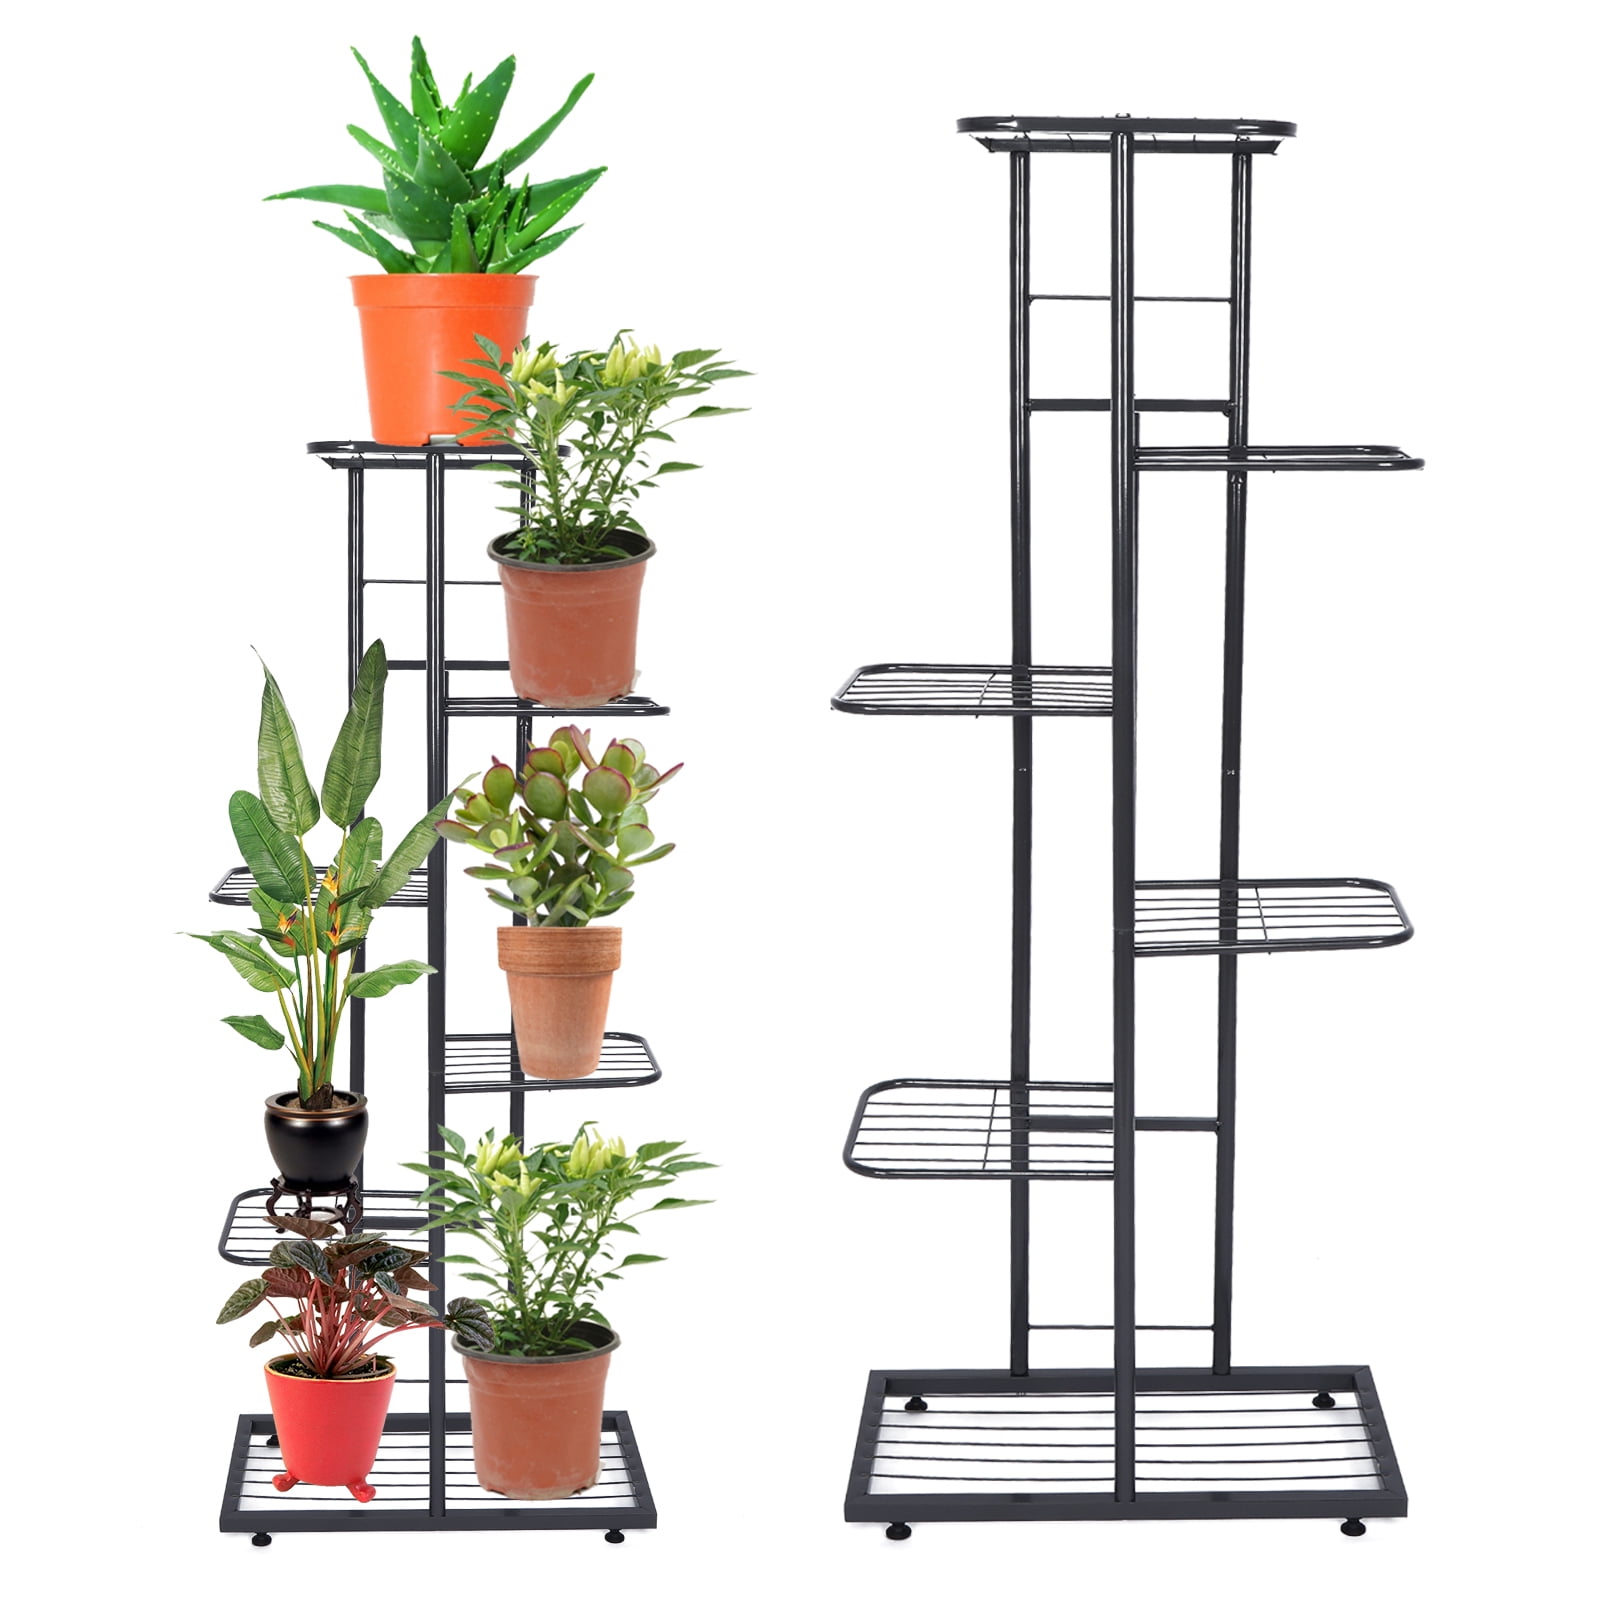 Details about   Heavy Duty Plant Stand Garden Flower Planter Shelves Wrought Iron Outdoor Indoor 